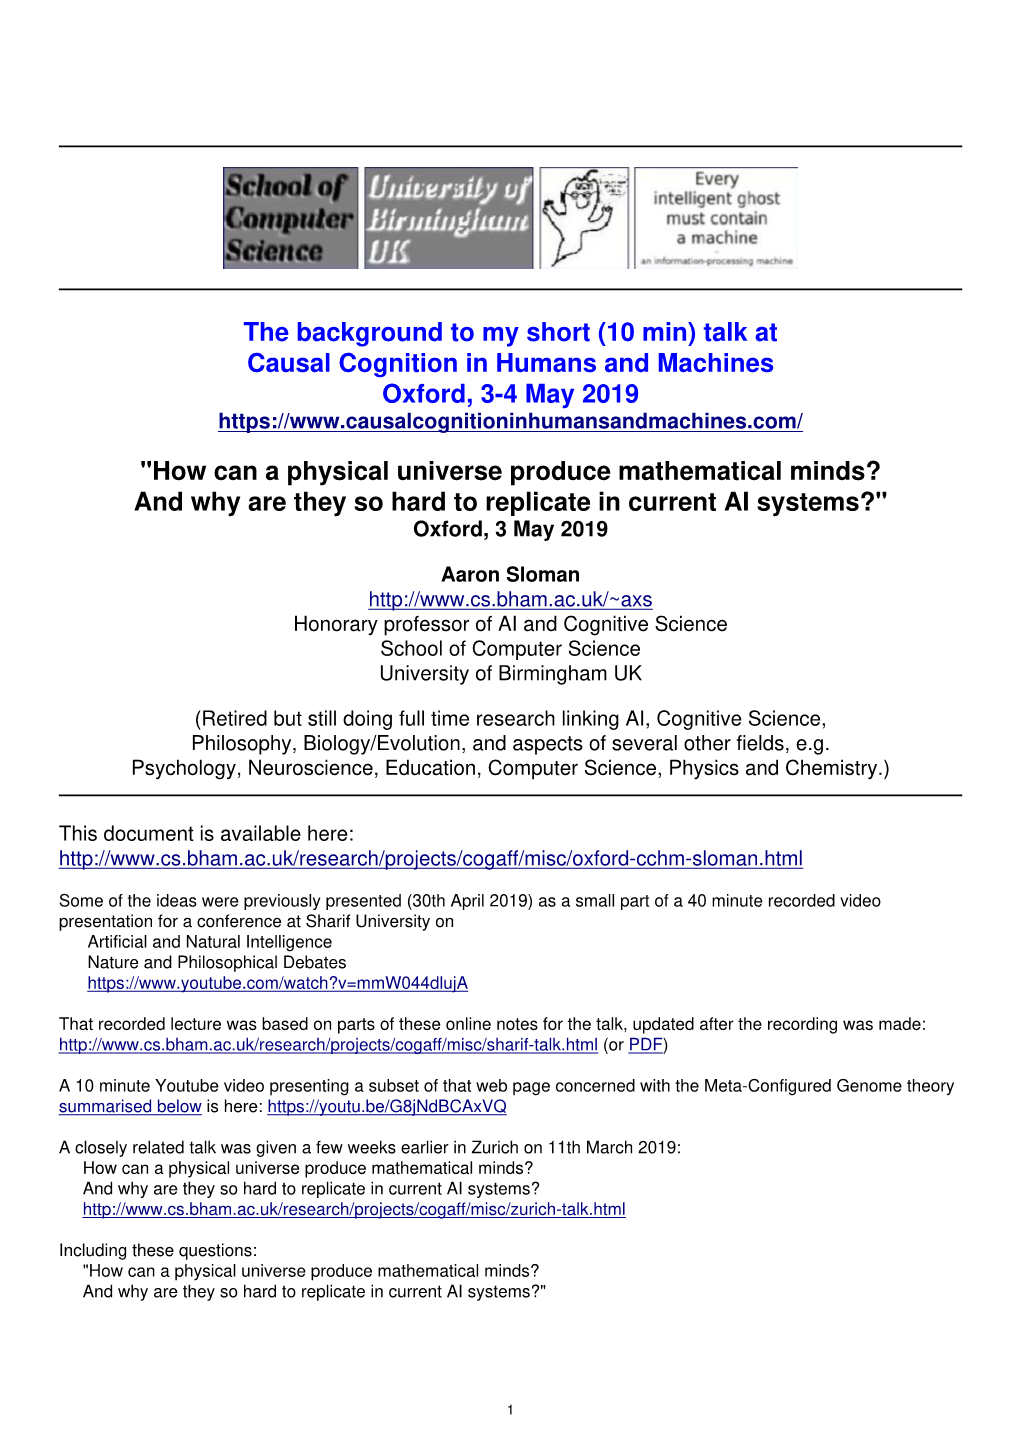 Talk at Causal Cognition in Humans and Machines Oxford, 3-4 May 2019